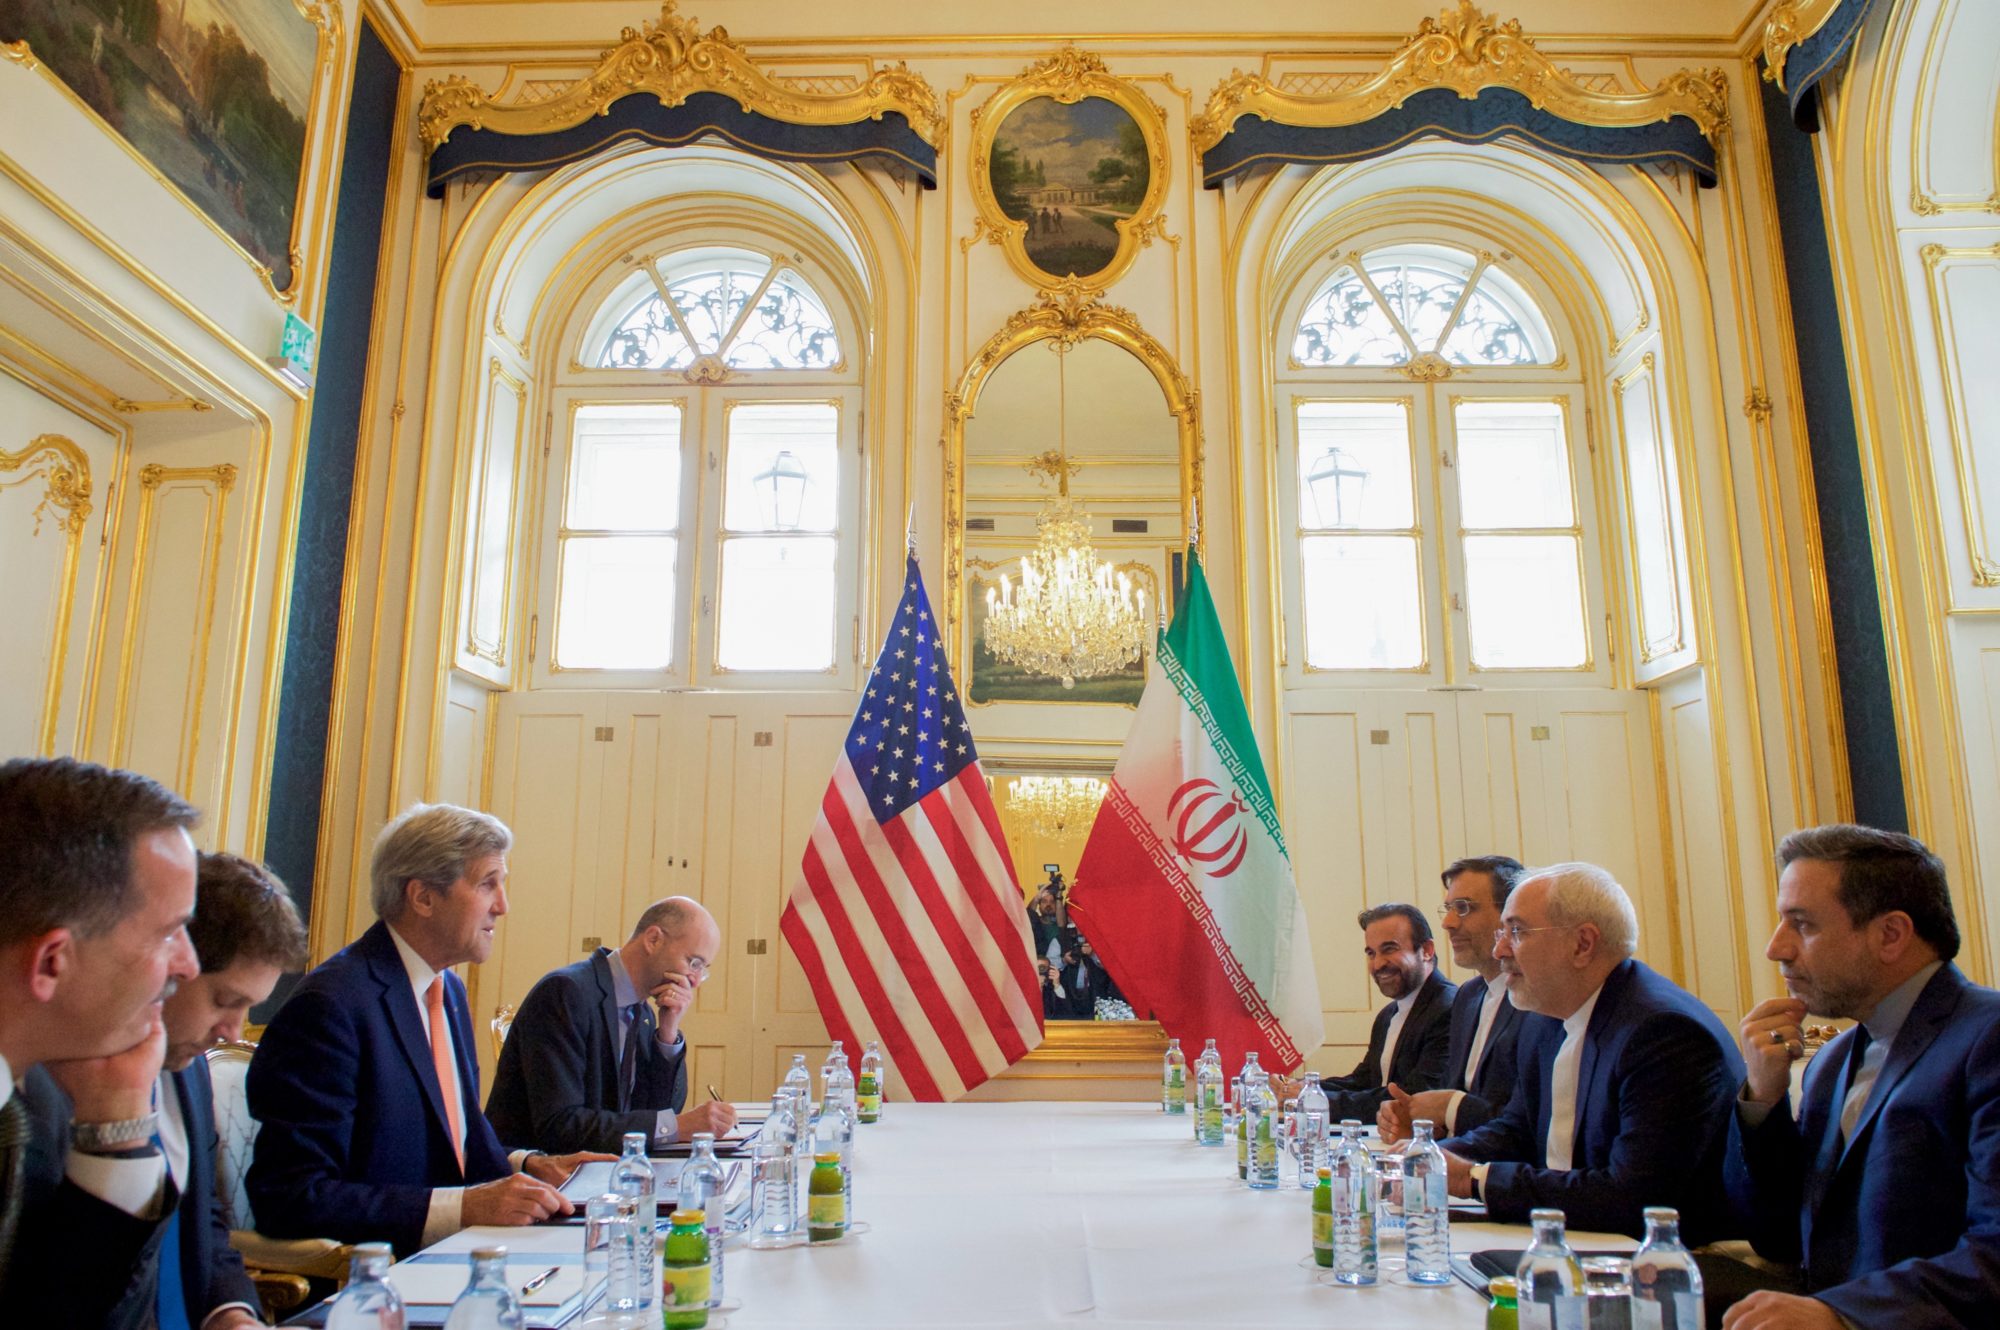 What You Should Know About the Iran Deal